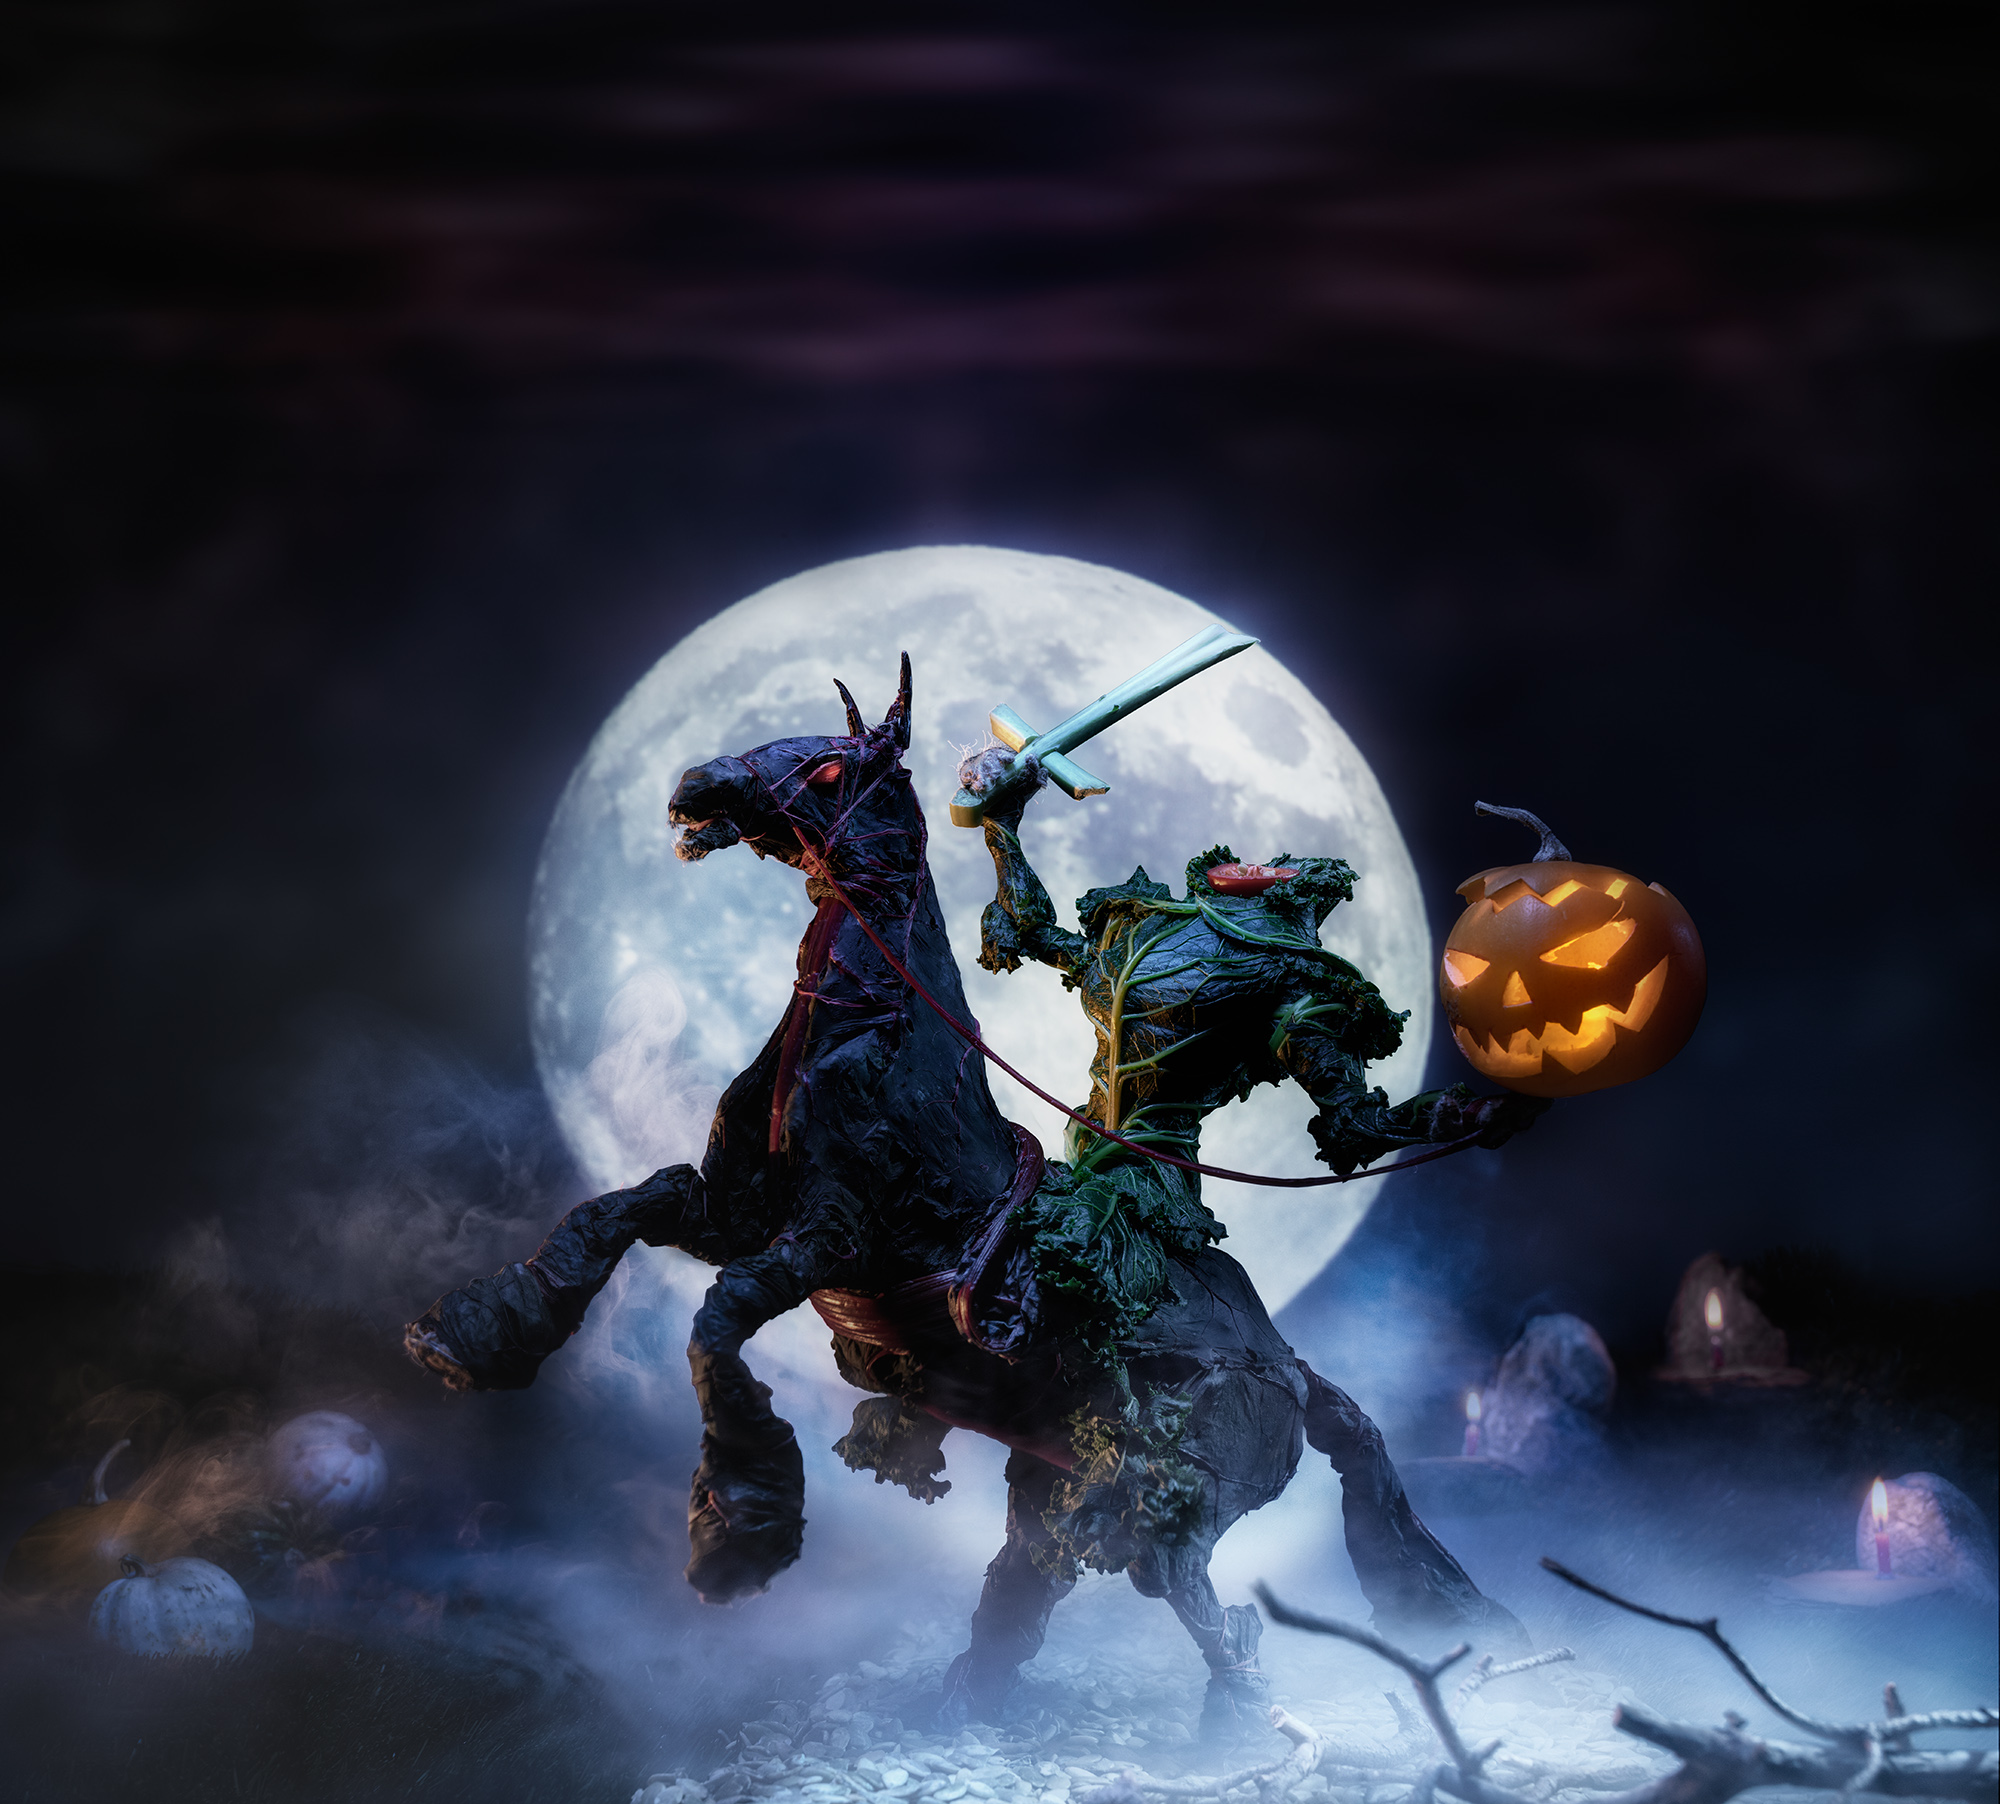 A headless rider made out of kale holding a sword in one hand and a lit pumpkin with carved out face in the other is sitting on a horse which is also made out of kale, the full moon behind them, set on a graveyard in the fog.